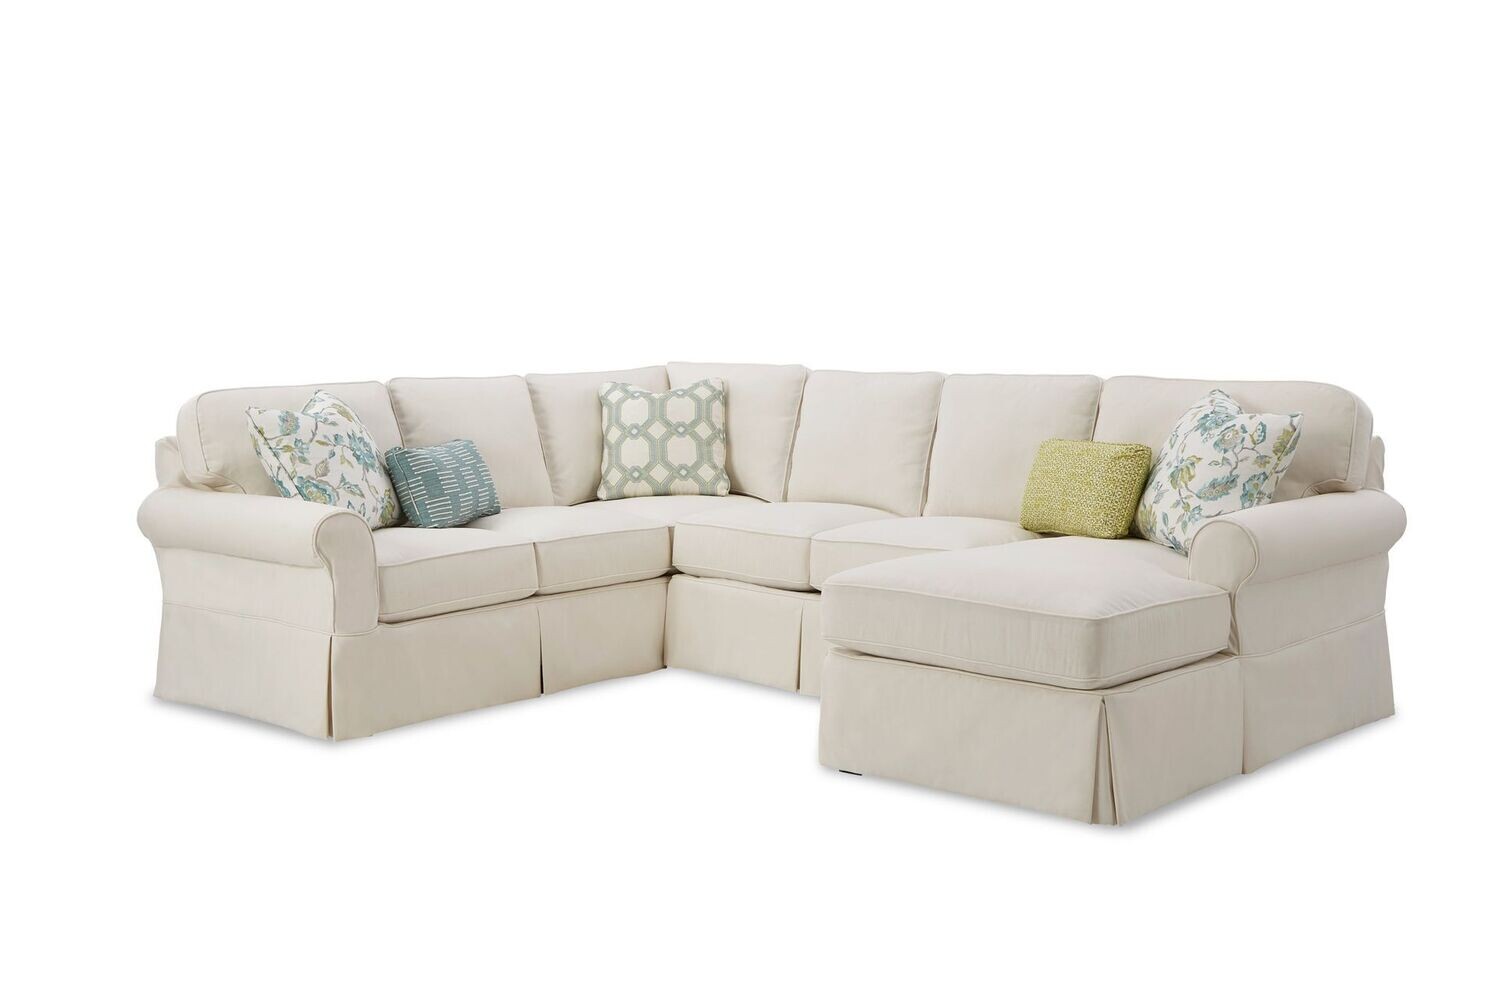 Craftmaster 9174 Slipcover Sectional